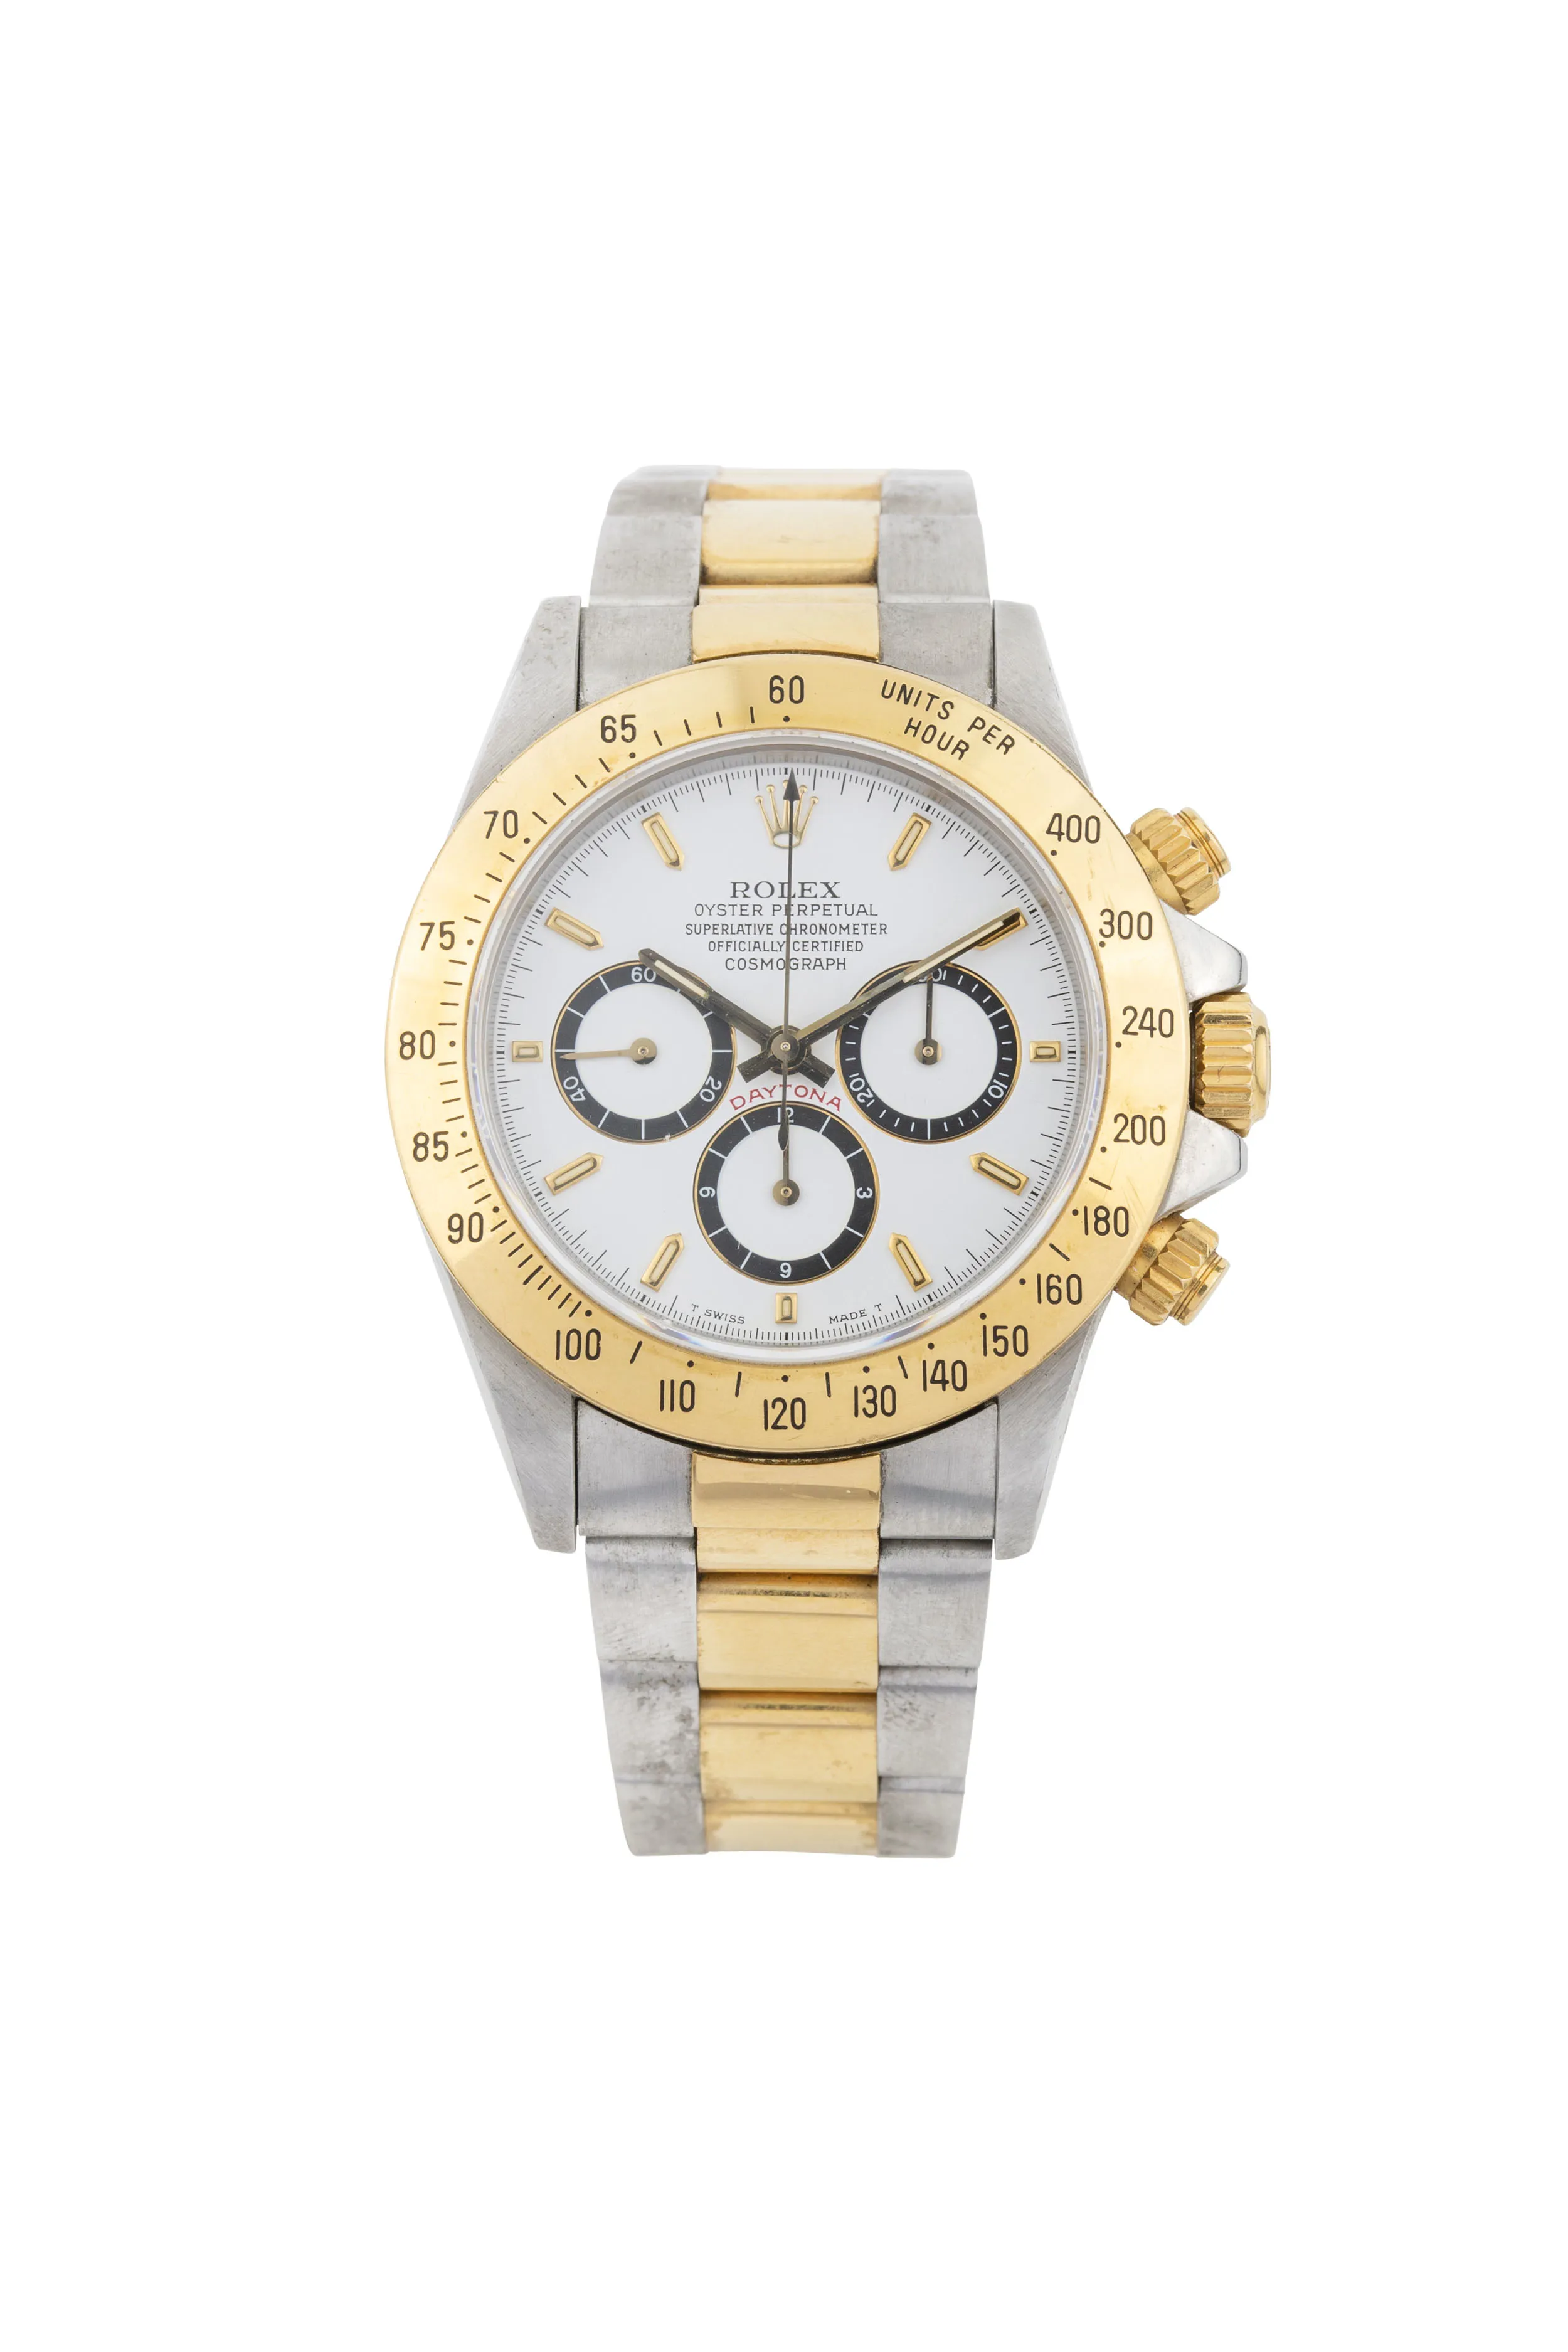 Rolex Daytona 16523 40mm Stainless steel and gold